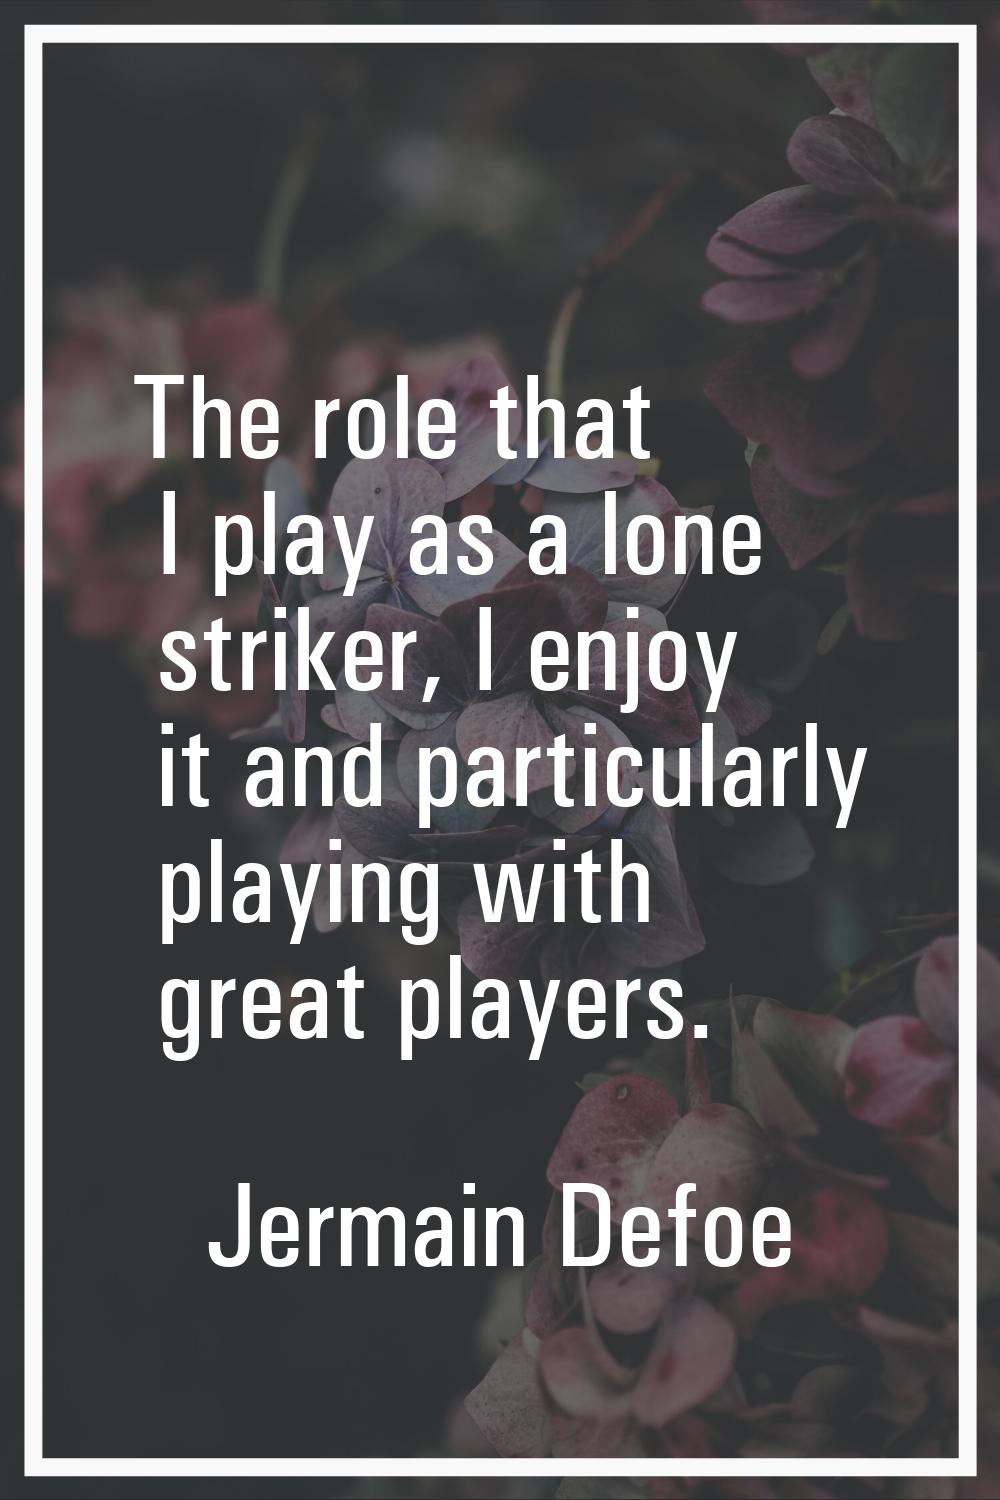 The role that I play as a lone striker, I enjoy it and particularly playing with great players.